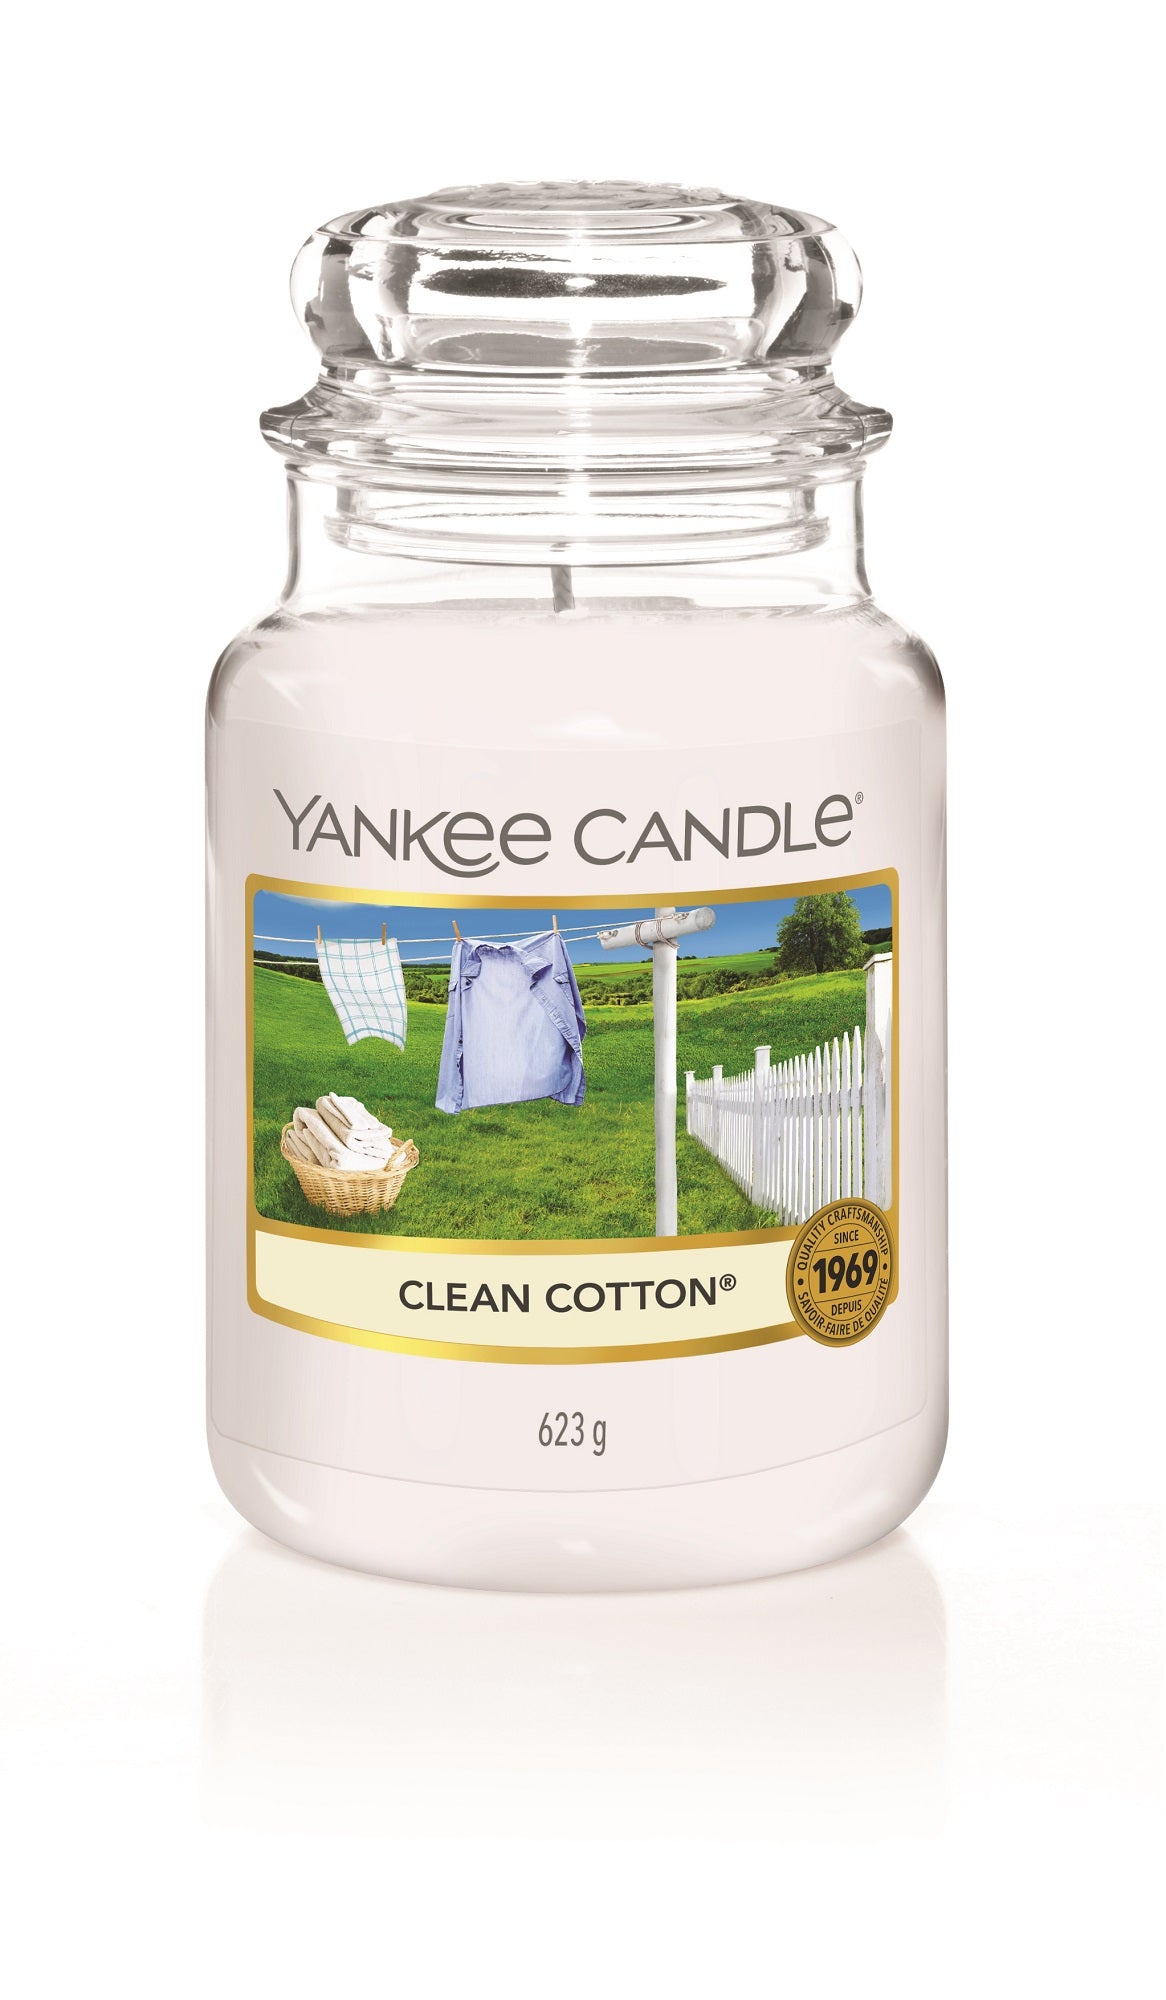 Yankee-Candle-Large-Jar-Clean-Cotton®